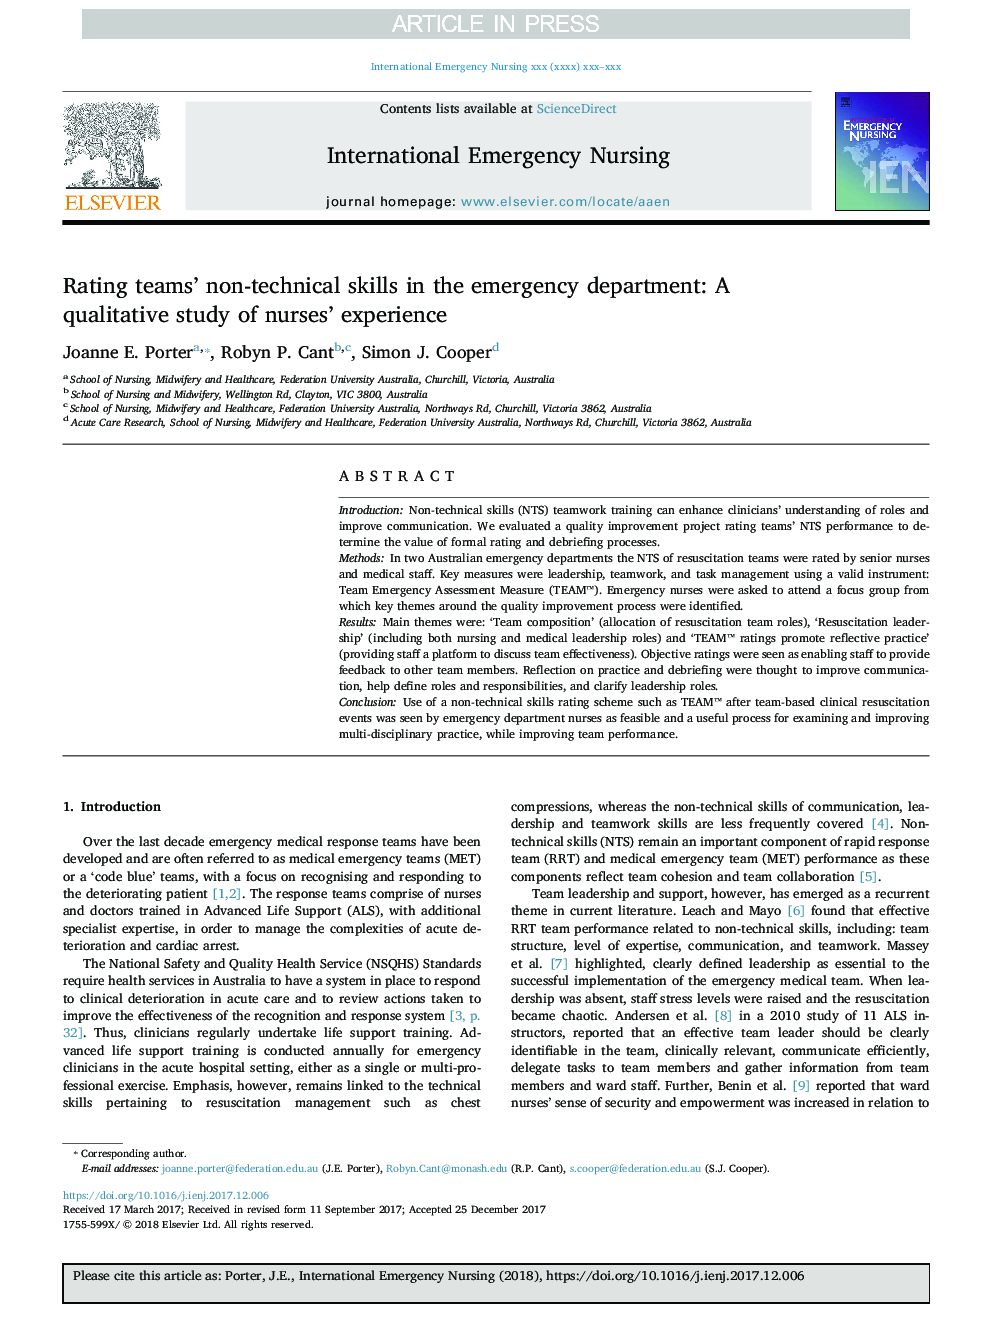 Rating teams' non-technical skills in the emergency department: A qualitative study of nurses' experience